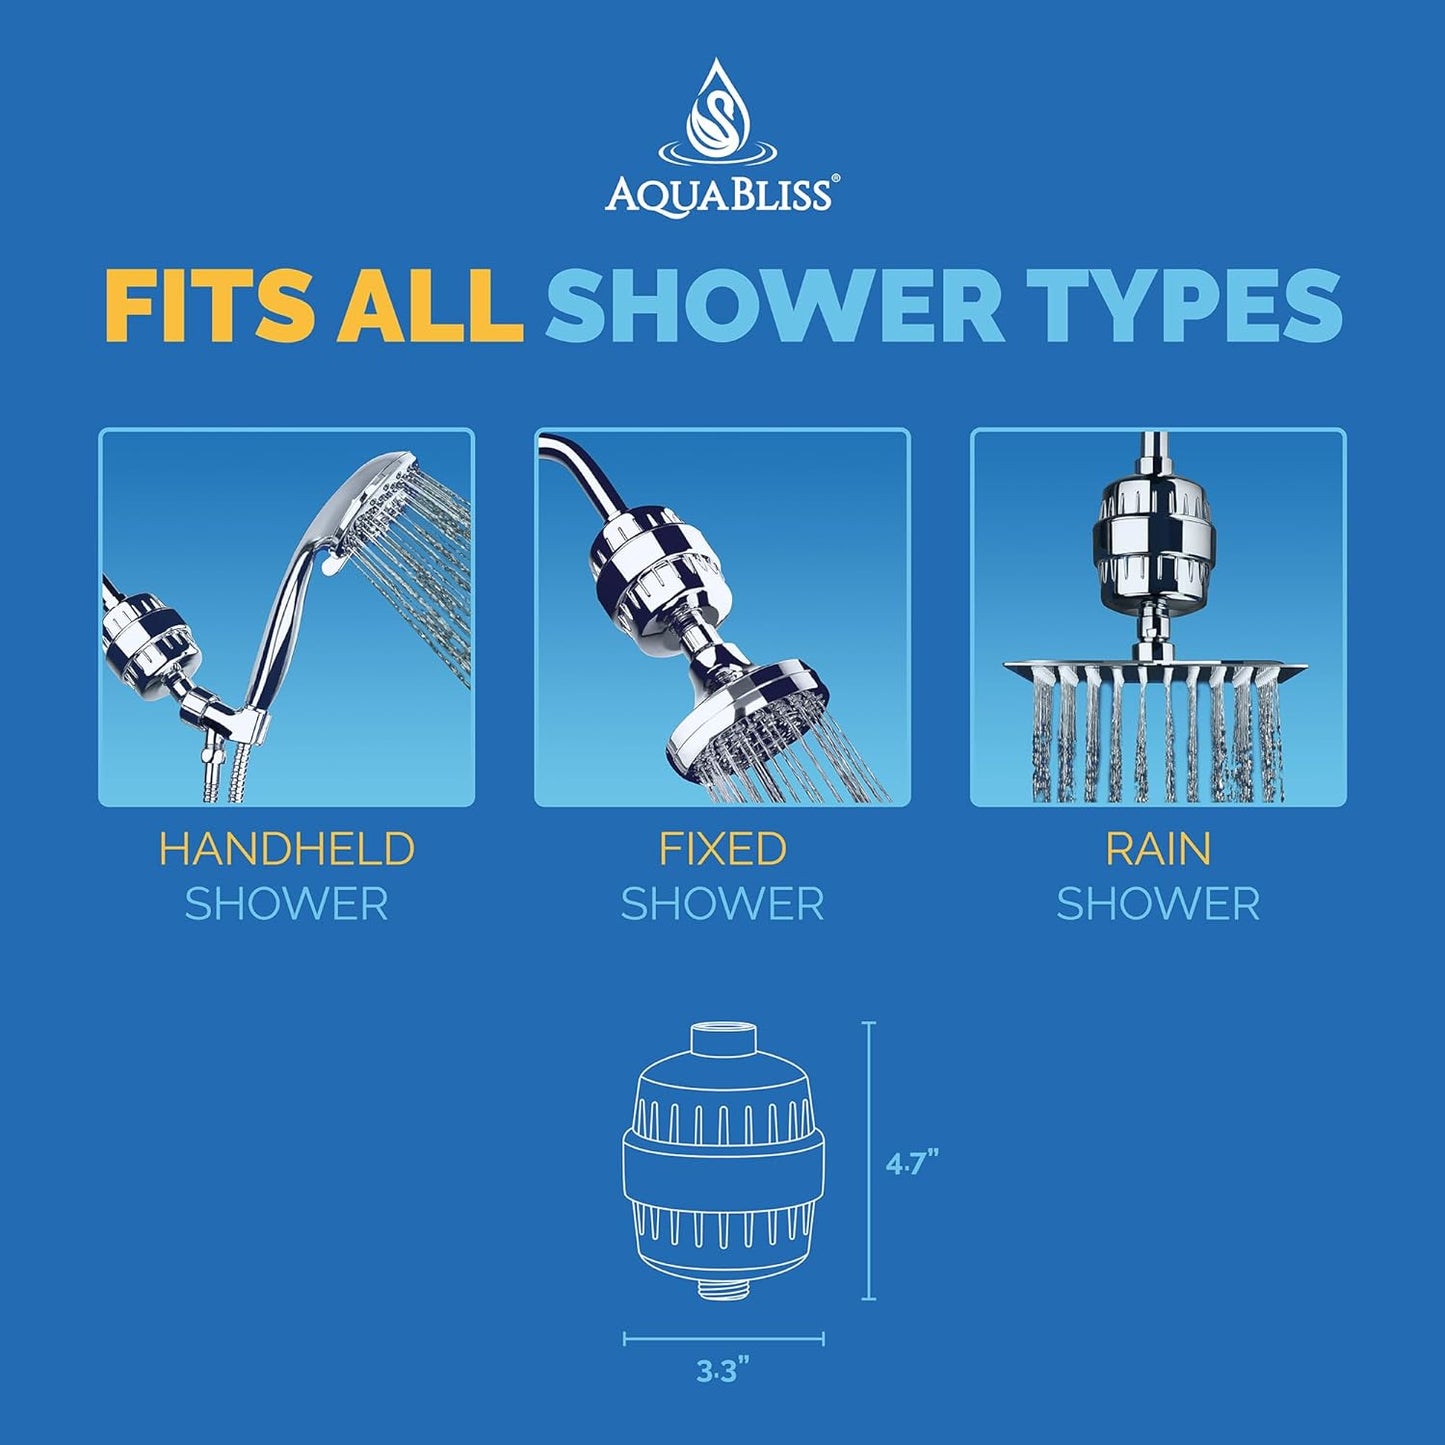 AquaBliss High Output Revitalizing Shower Filter - Reduces Dry Itchy Skin, Dandruff, Eczema, and Dramatically Improves The Condition of Your Skin, Hair and Nails - Chrome (SF100)